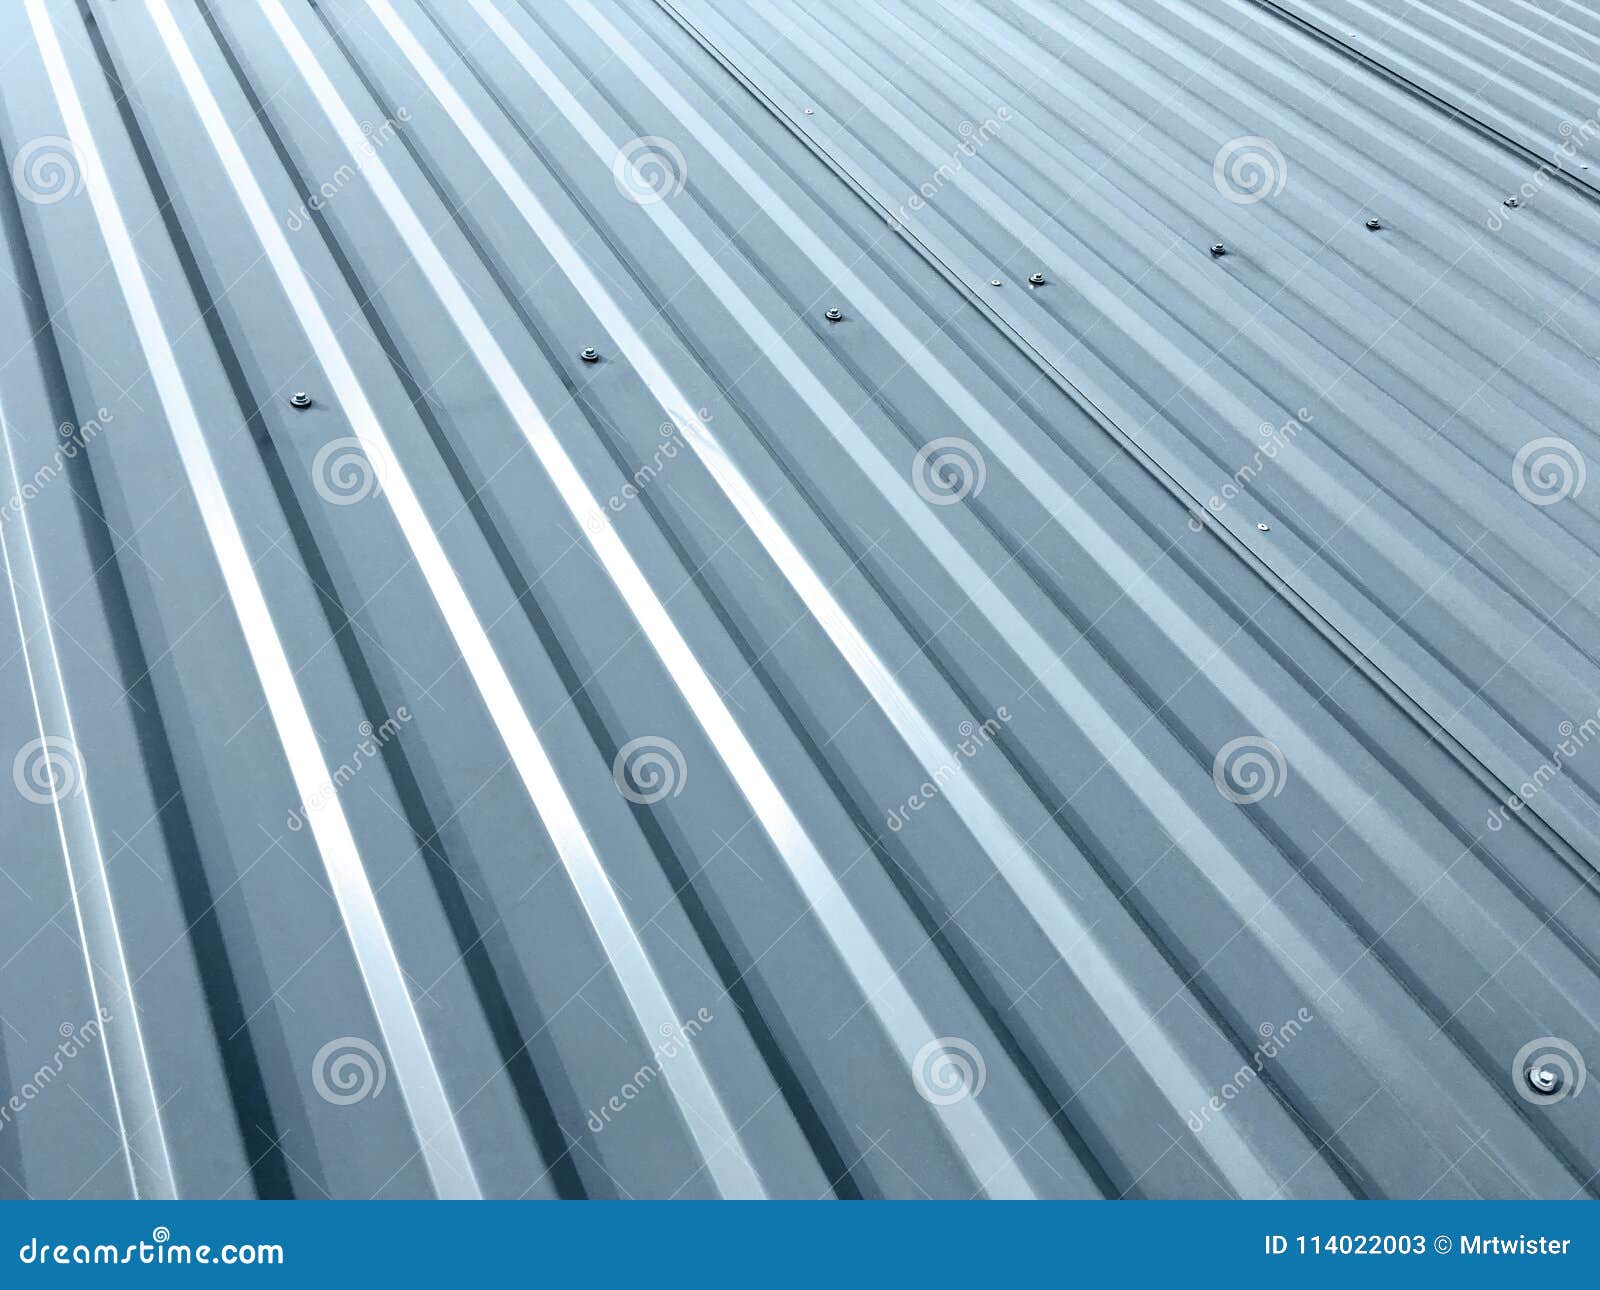 Corrugated Grey Metal Roof with Rivets Stock Image - Image of metallic ...